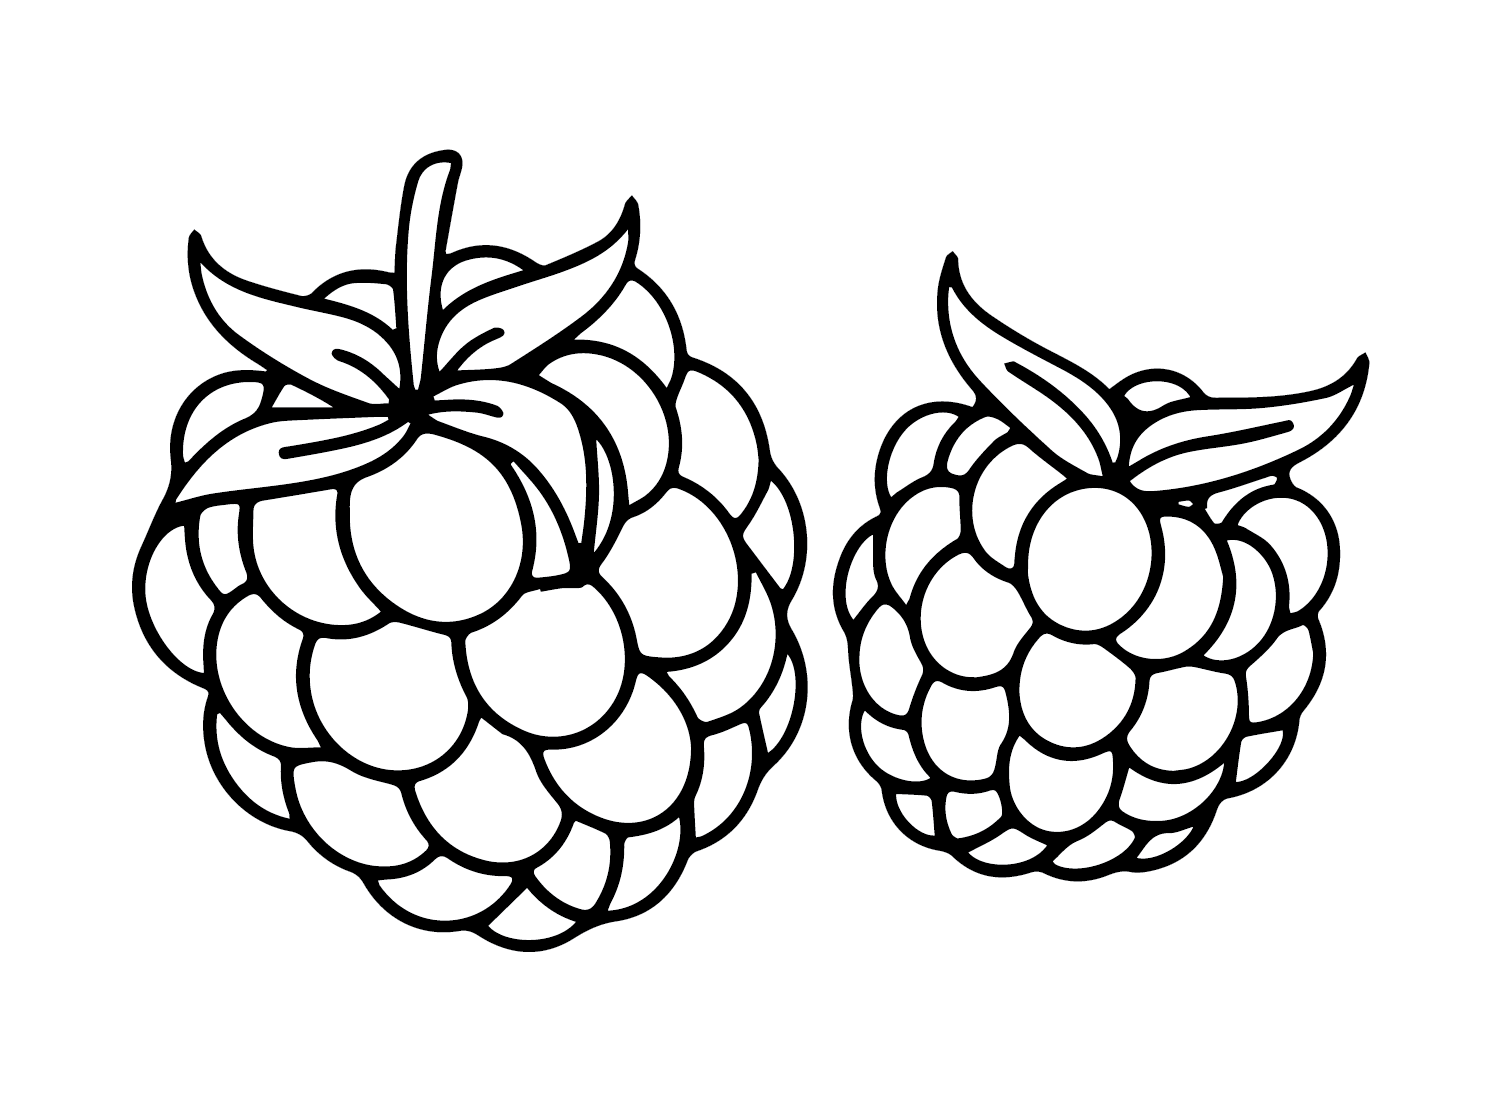 Raspberry coloring pages printable for free download